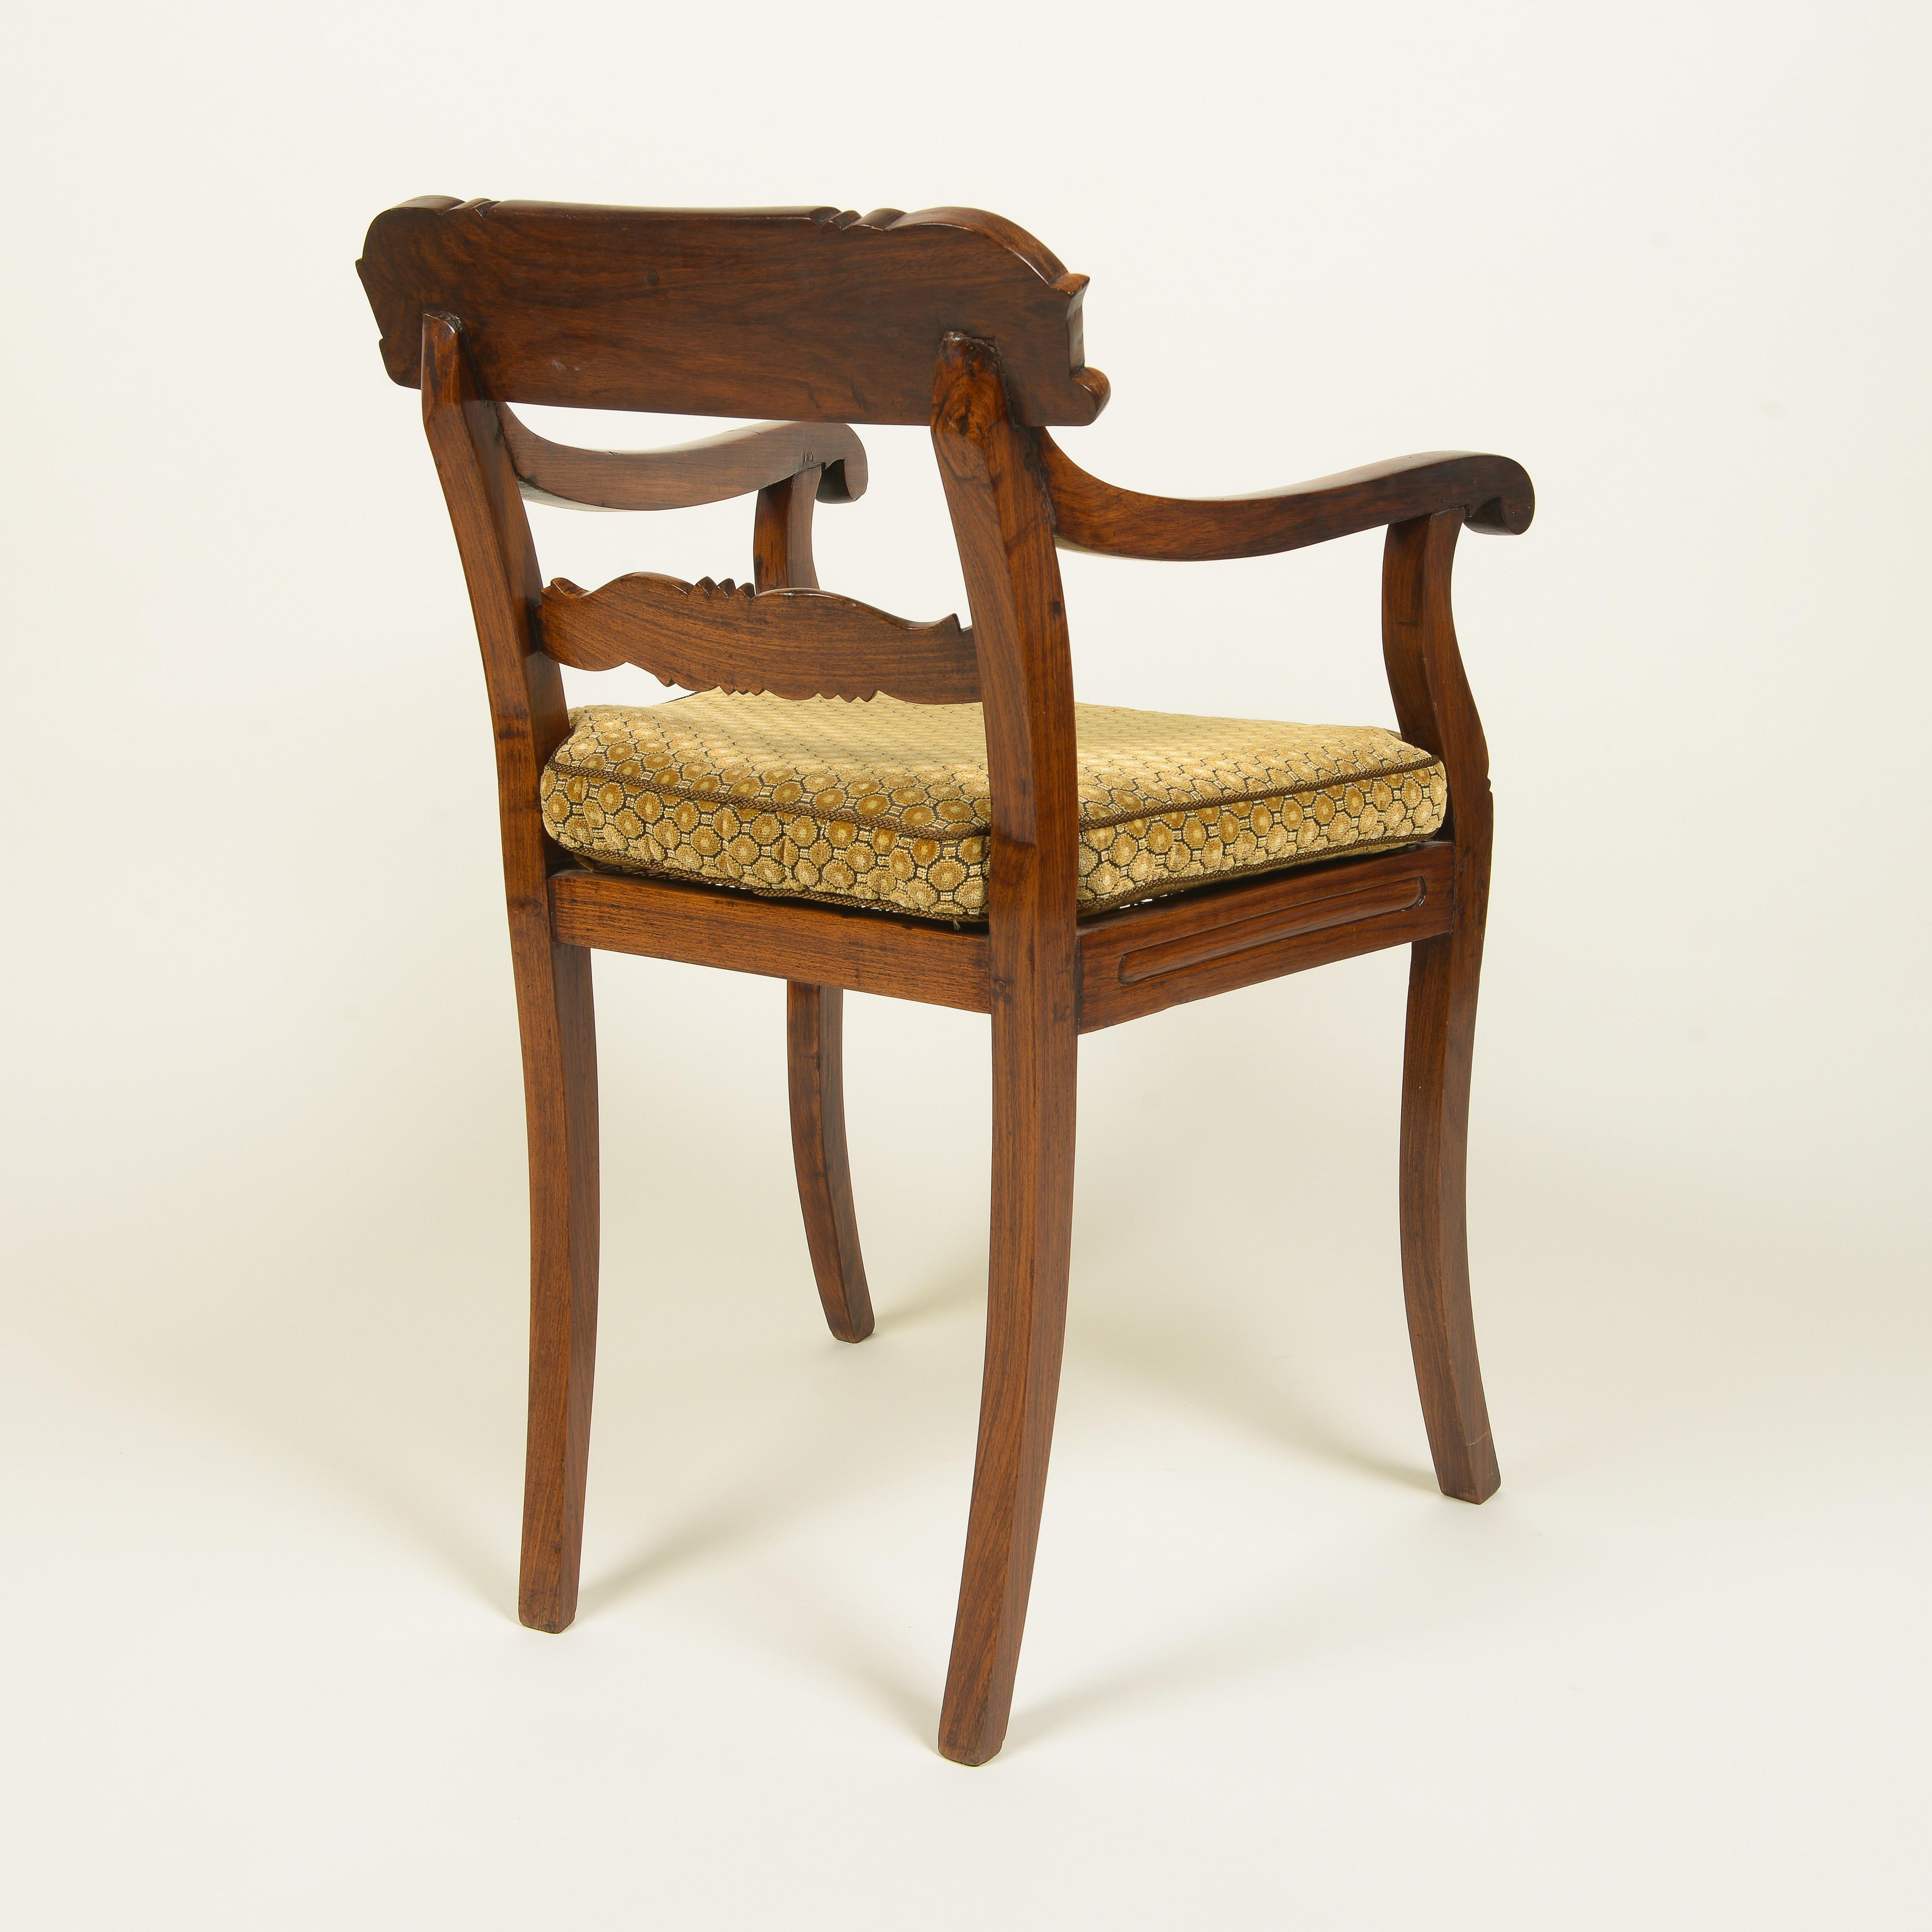 Early 19th Century Anglo-Indian Neoclassical Hardwood Armchair For Sale